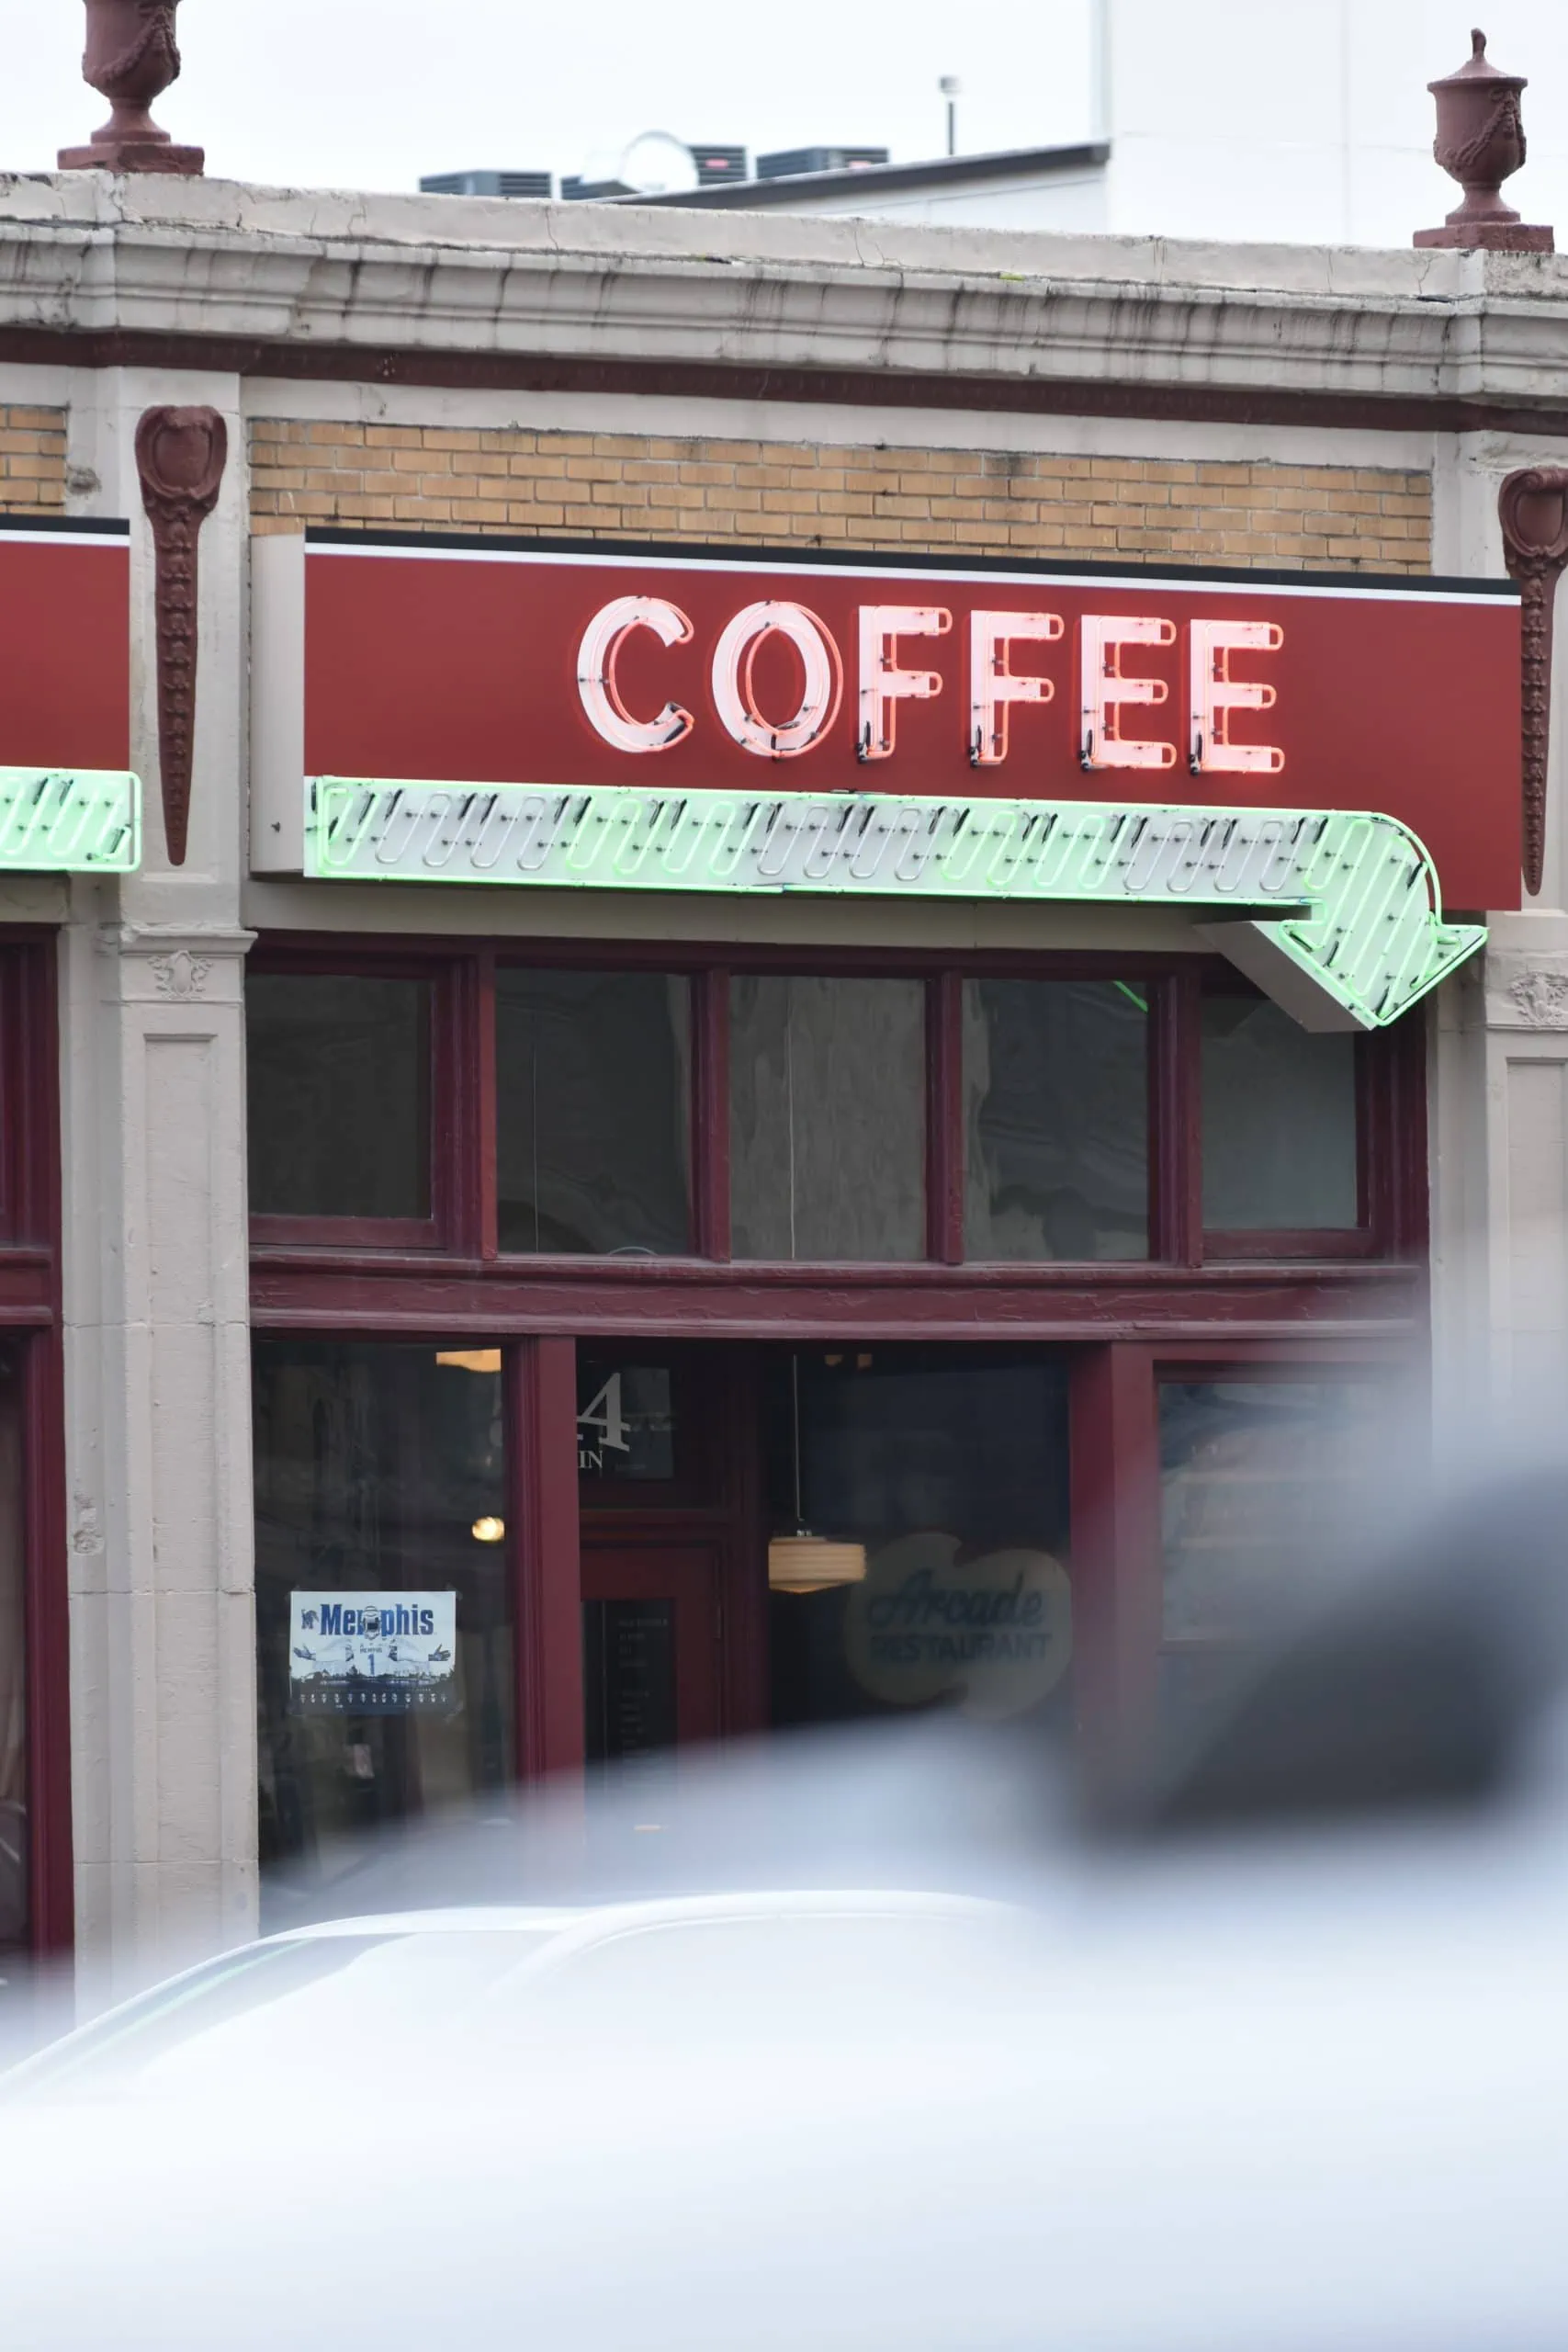 Coffee shop in downtown Memphis that has security cameras to protect against crime